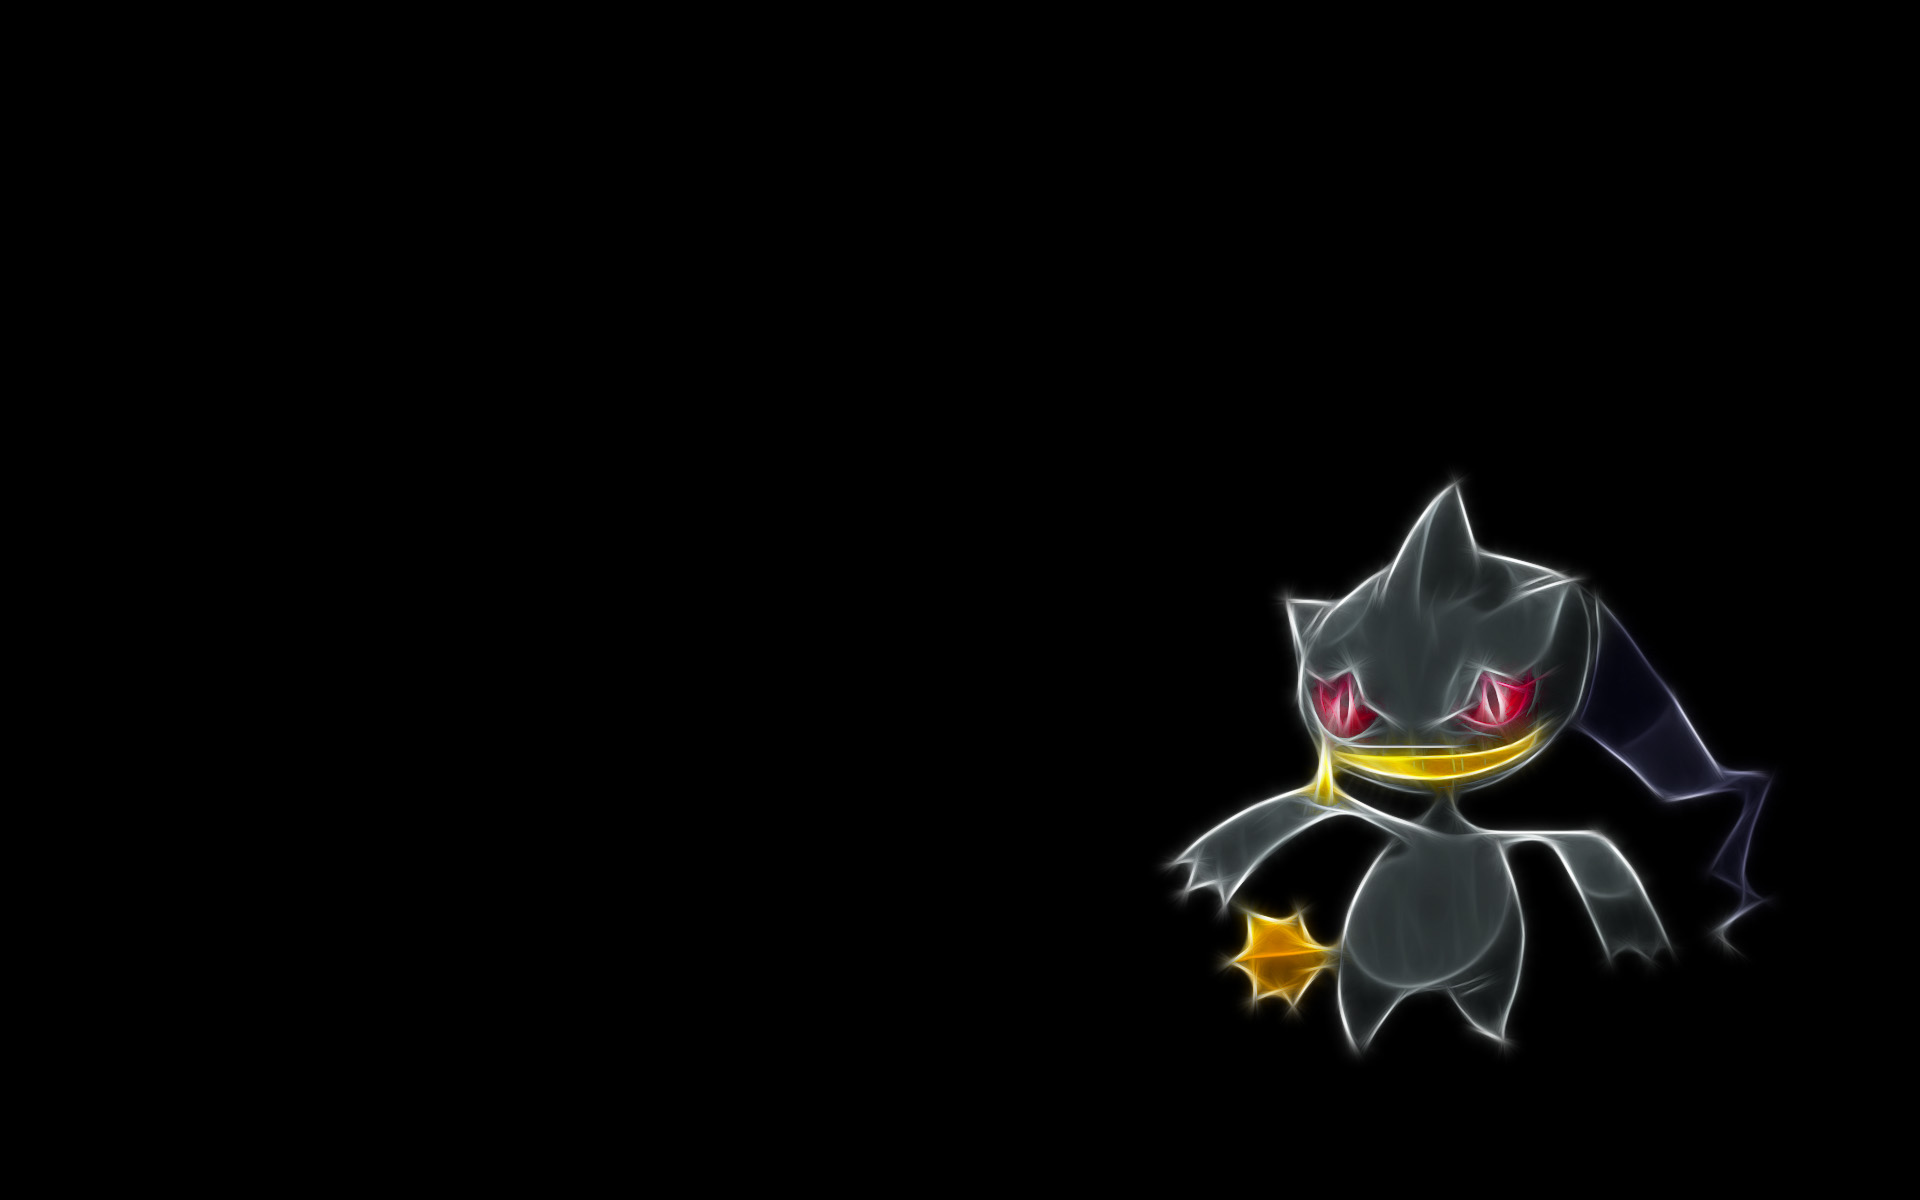 A dark silhouette of Banette, a ghost Pokémon adorned with anime style.